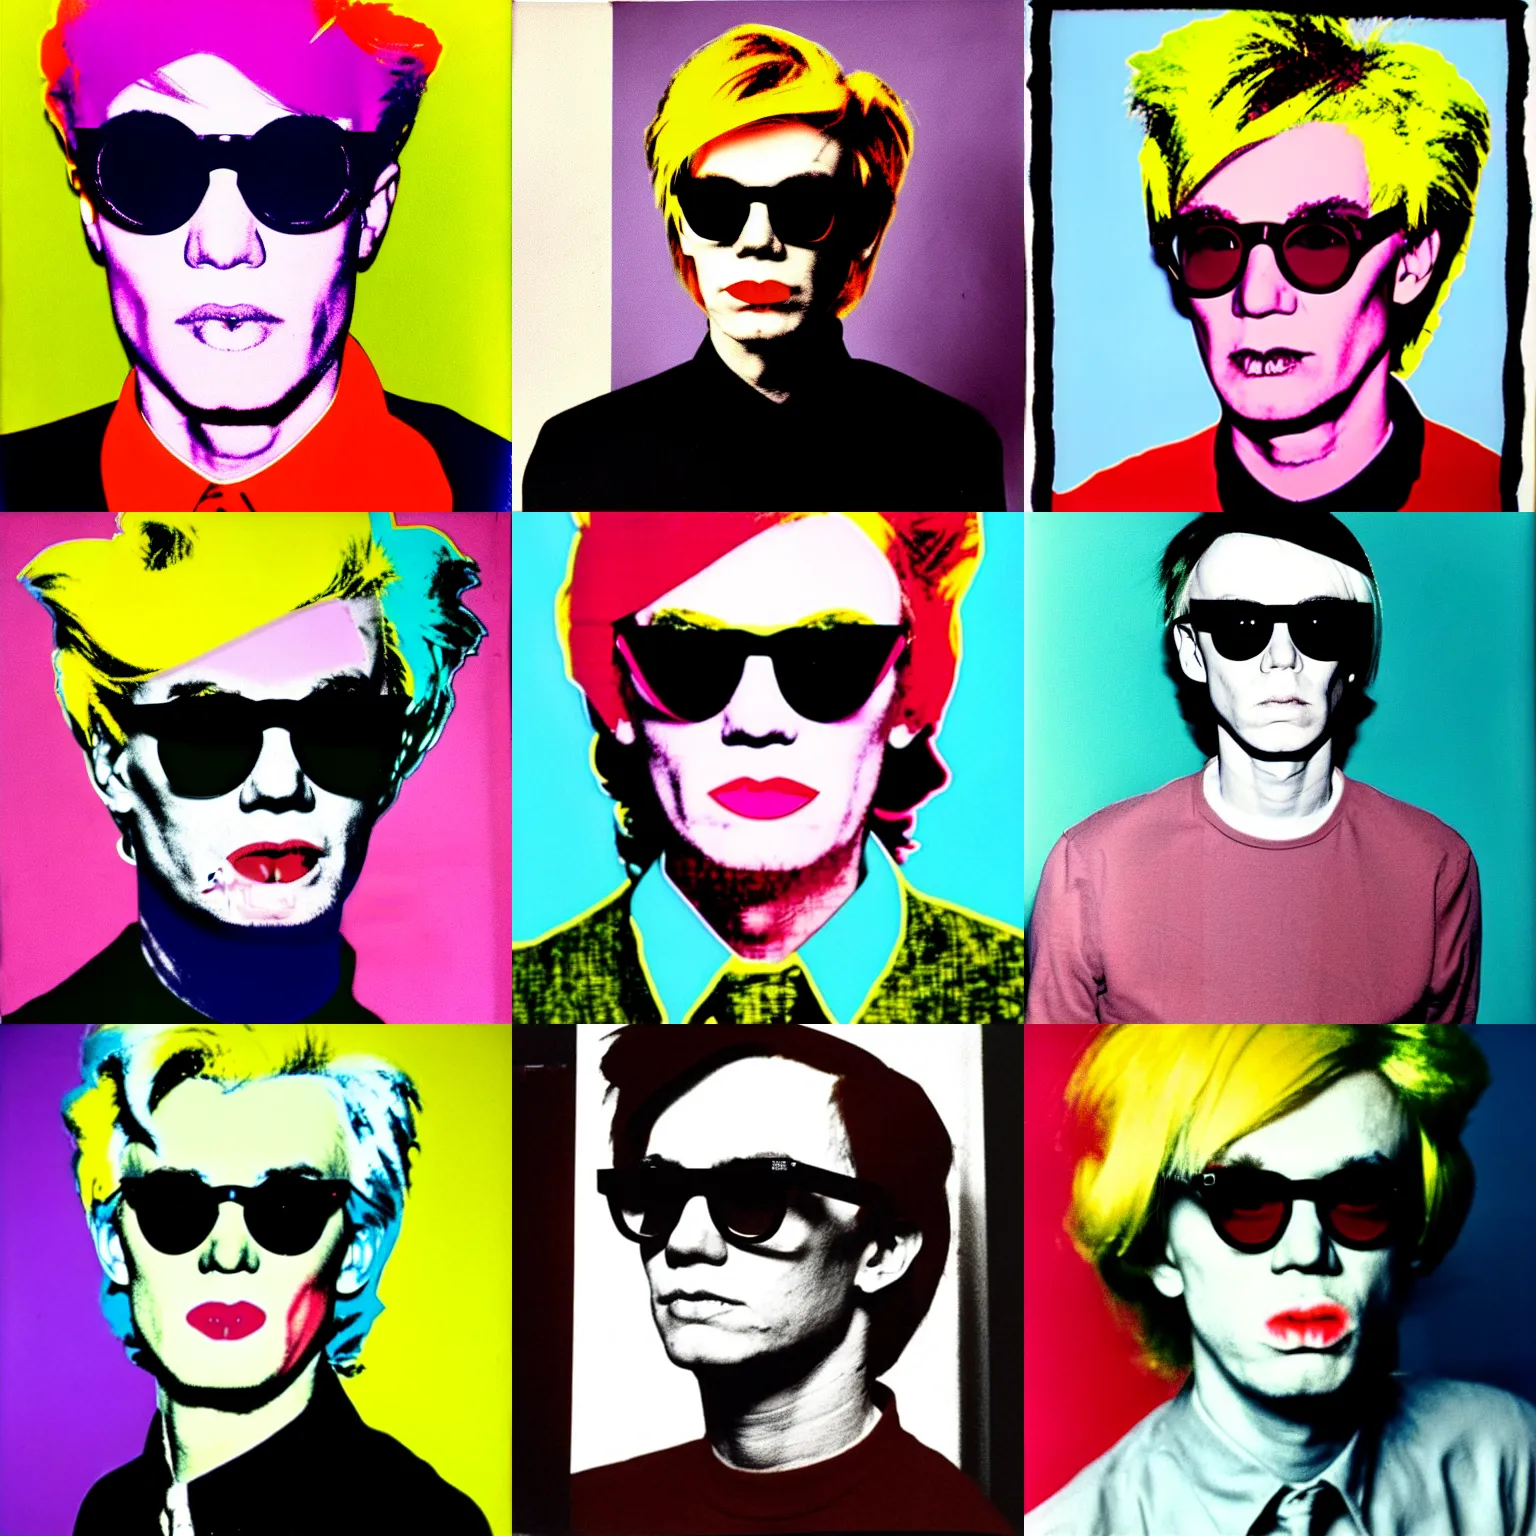 Prompt: colour portrait of absolutely angry andy warhol aged 20 looking sternly straight into the camera and wearing designer sun glasses, in the style of andy warhol